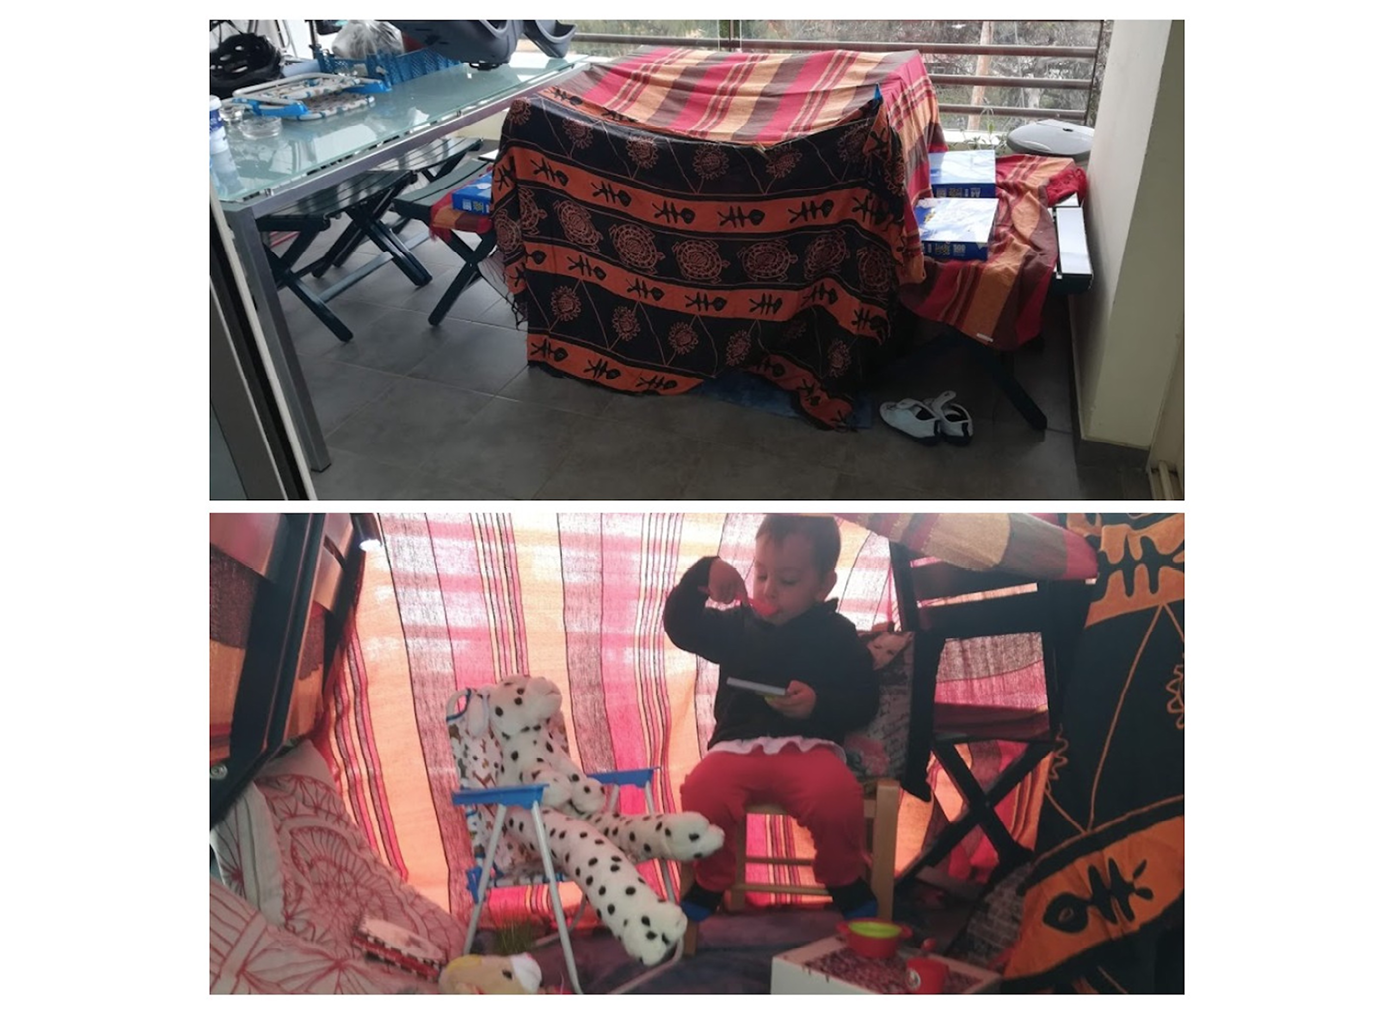 Two shots of a young child's den: Exterior and interior.